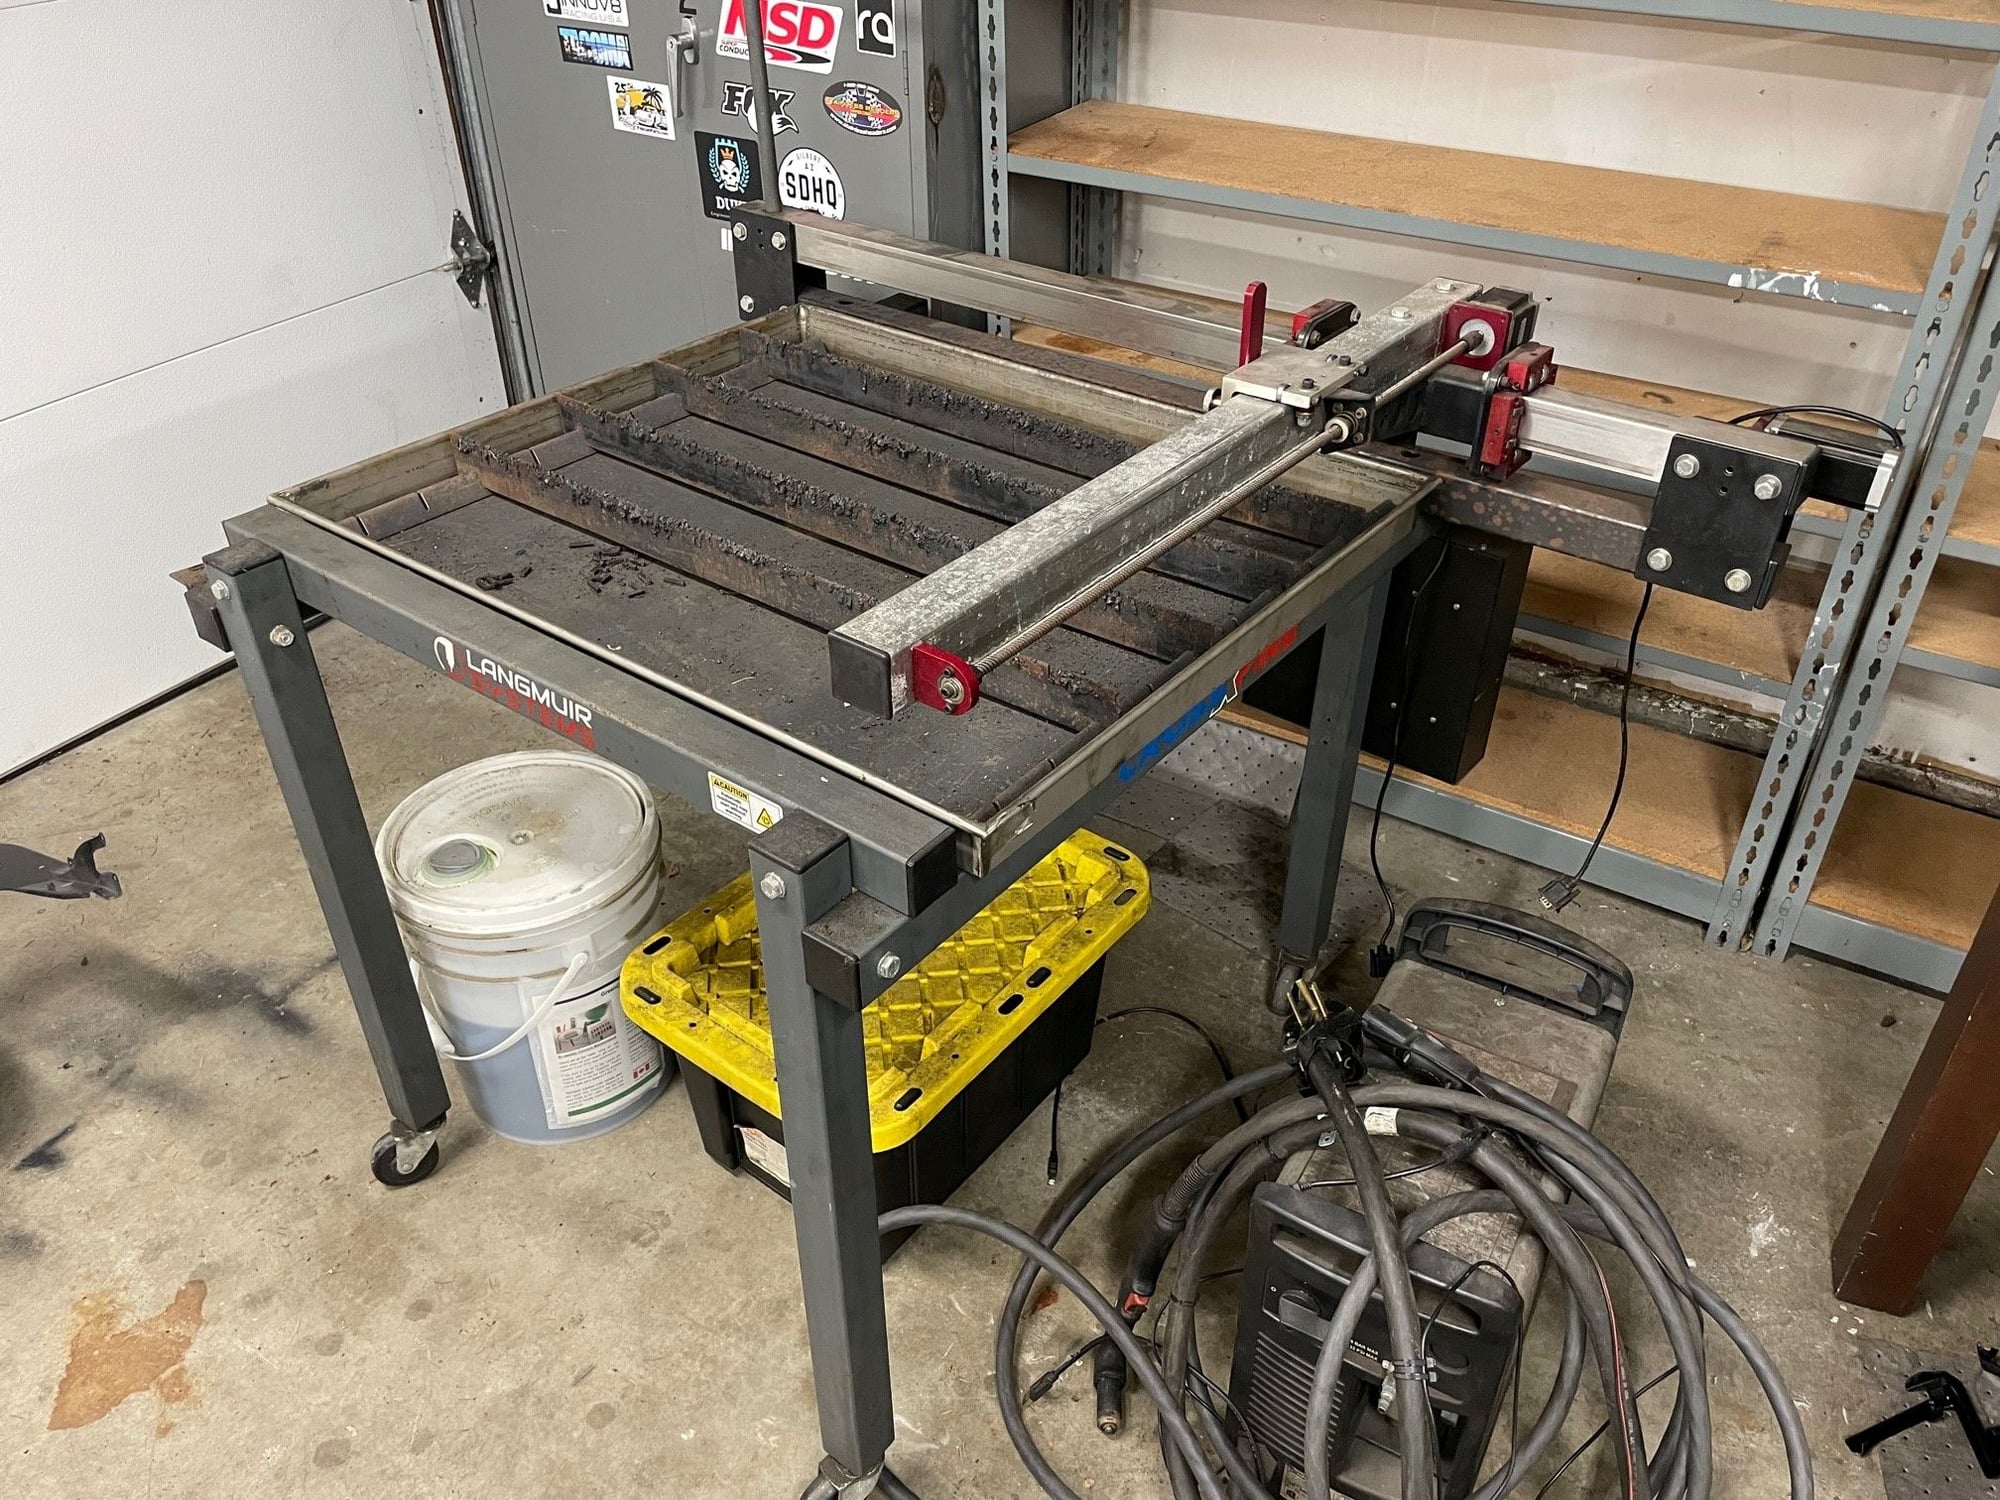 Miscellaneous - Langmuir Systems Crossfire XL CNC Plasma Cutting Table - Used - All Years Any Make All Models - Kirkland, WA 98034, United States